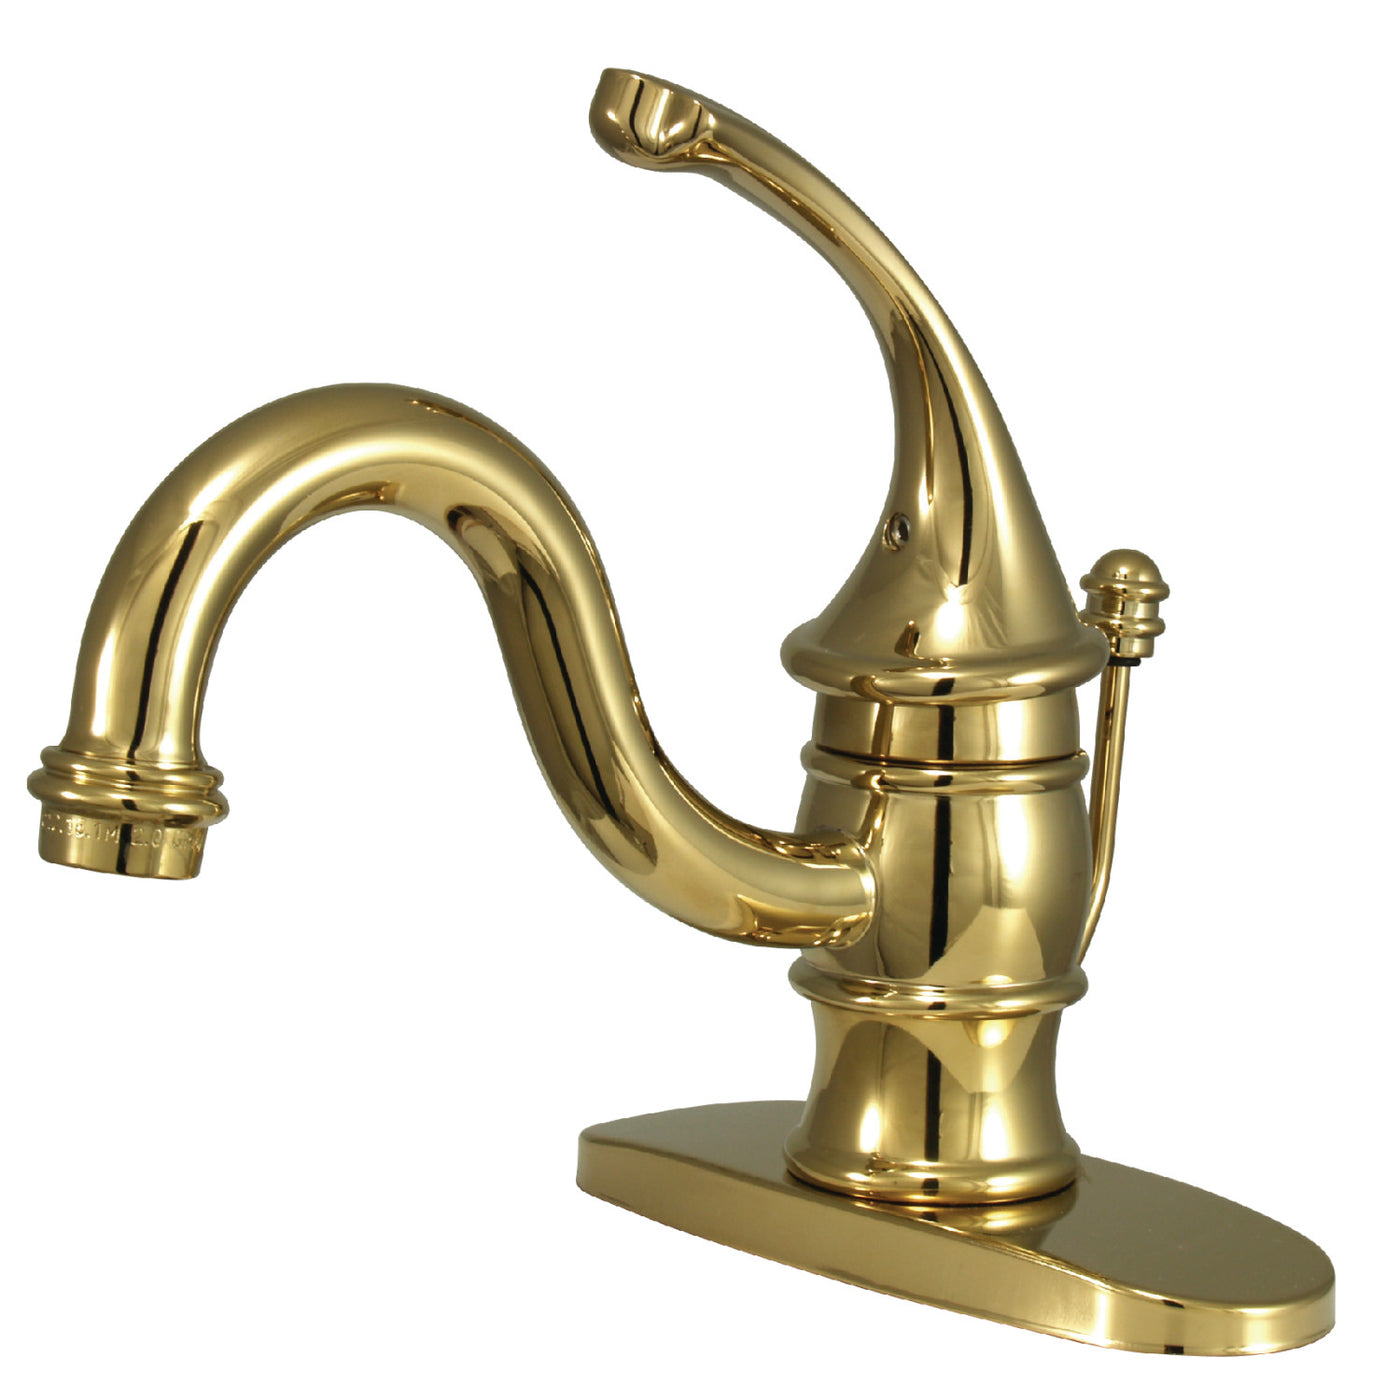 Elements of Design EB3402GL Single-Handle Bathroom Faucet with Pop-Up Drain, Polished Brass